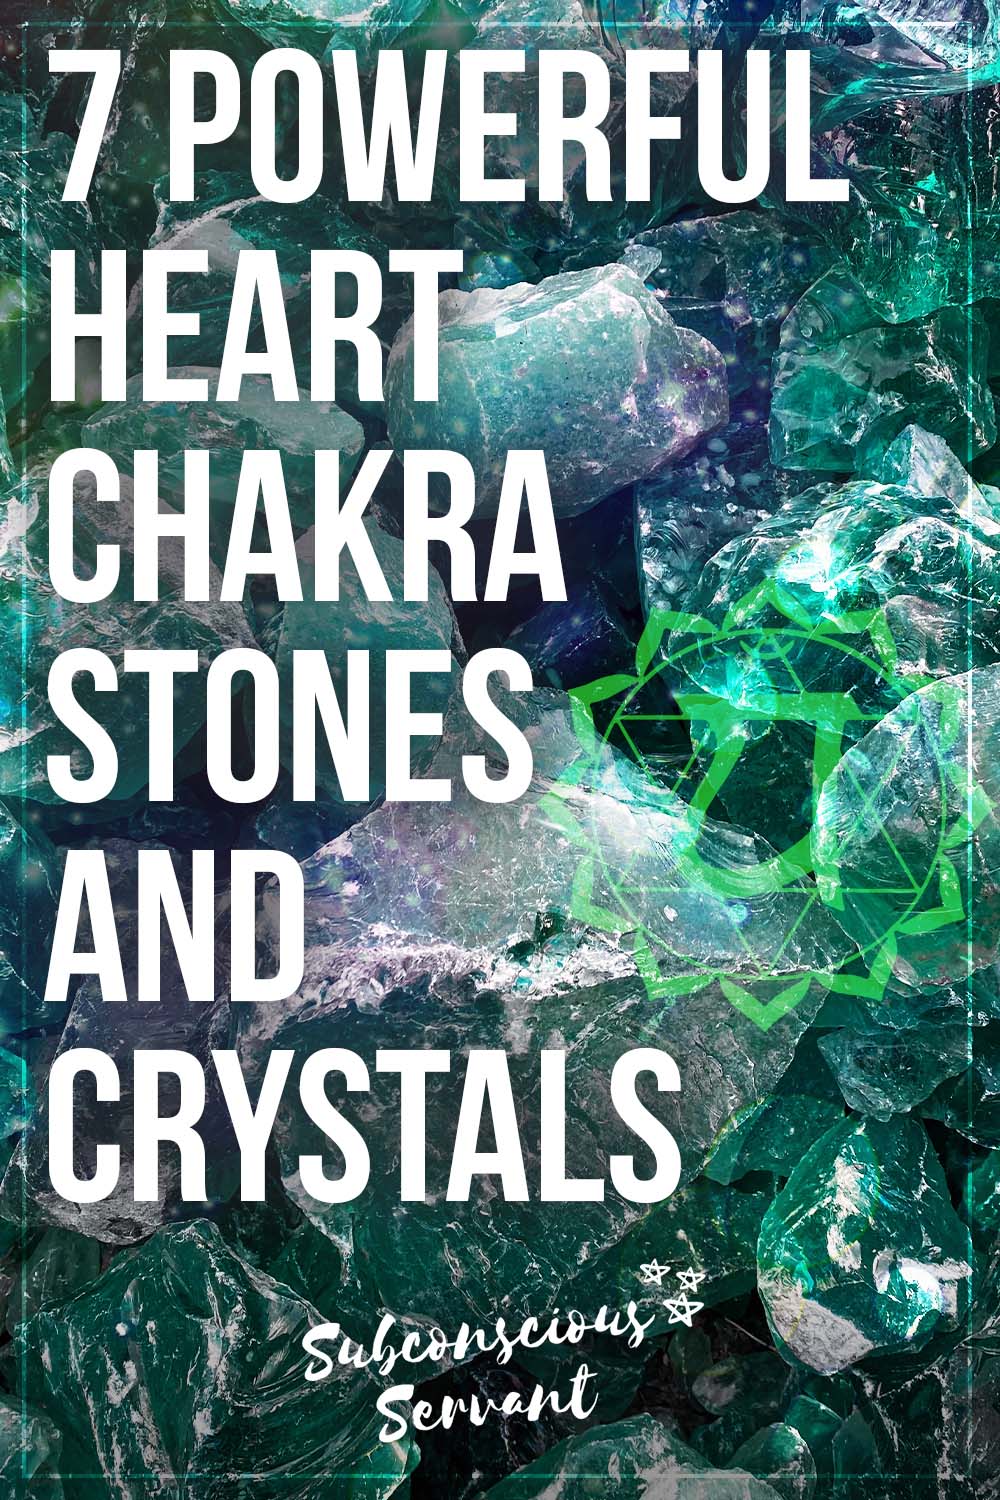 7 Powerful Heart Chakra Stones & Crystals For Healing